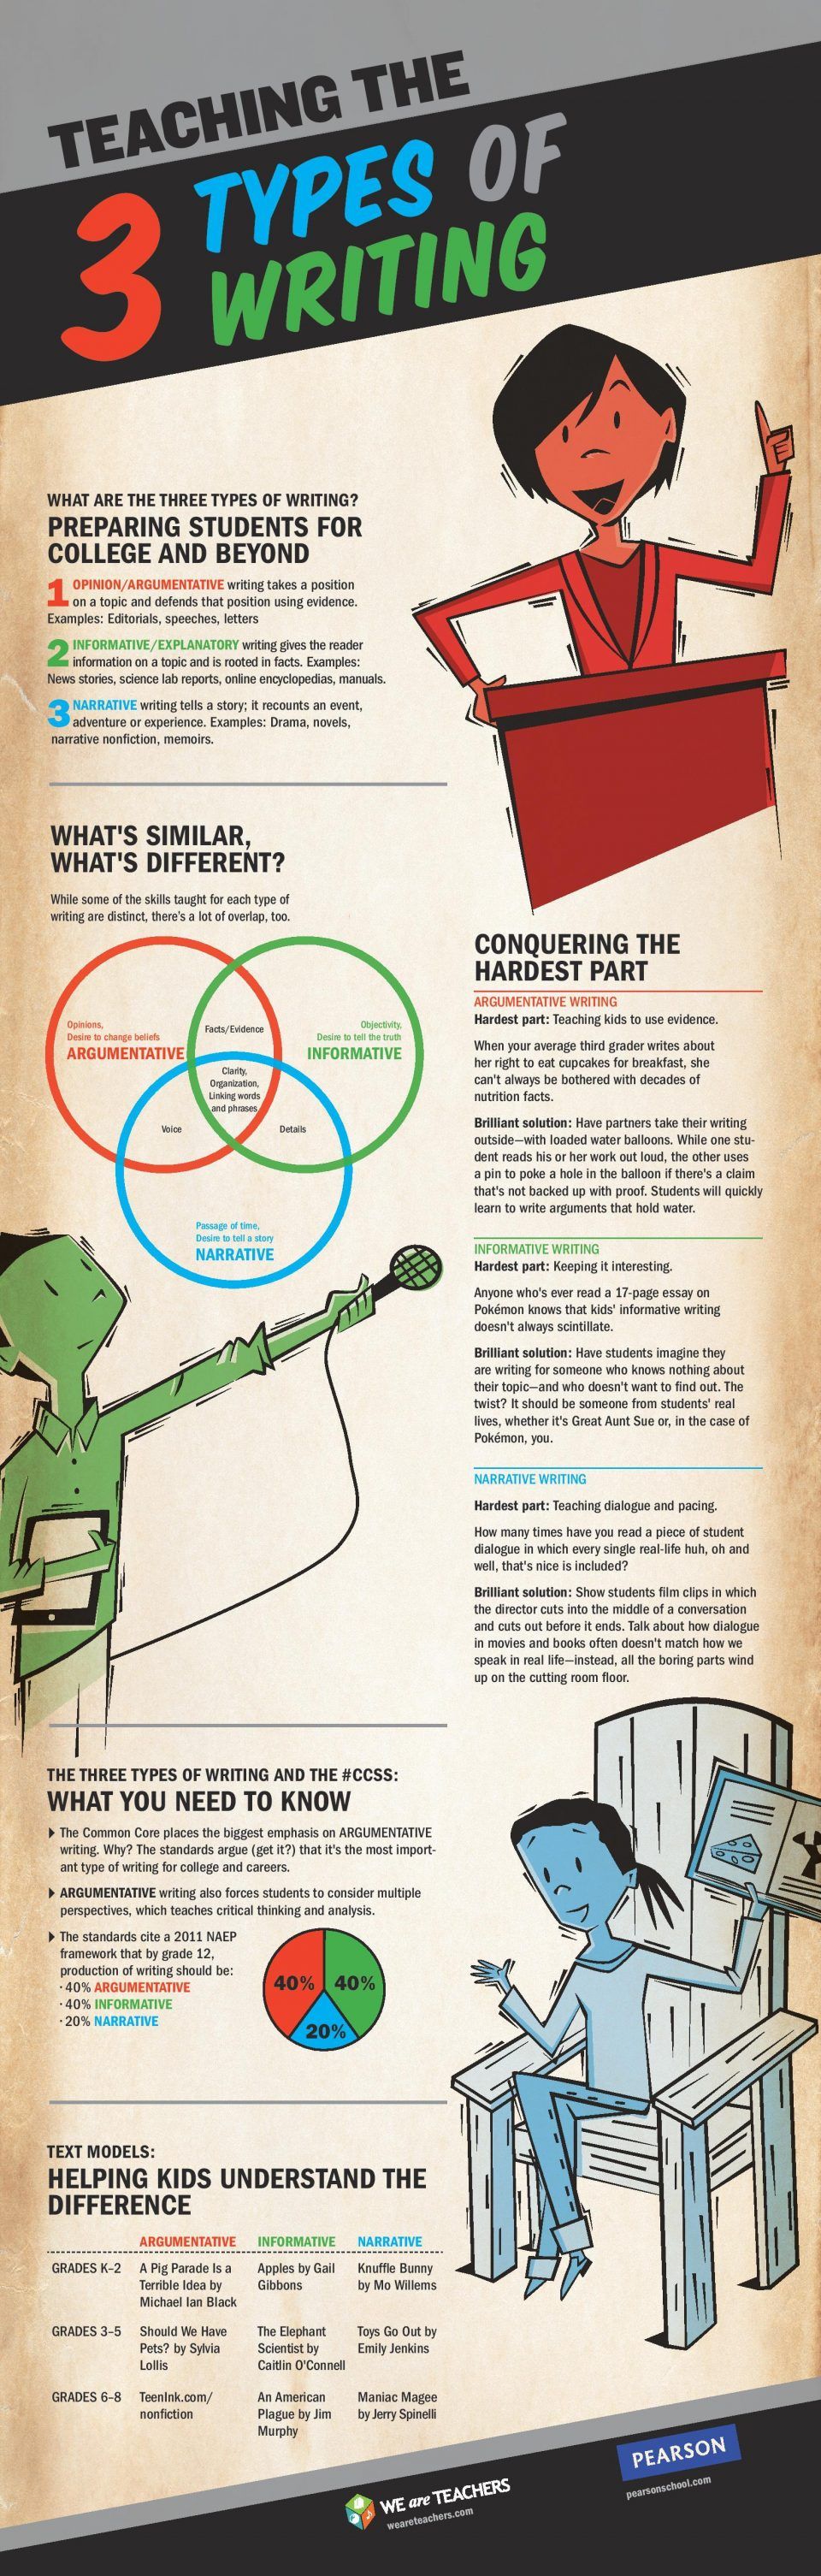 Teaching the 3 Types of Writing Infographic